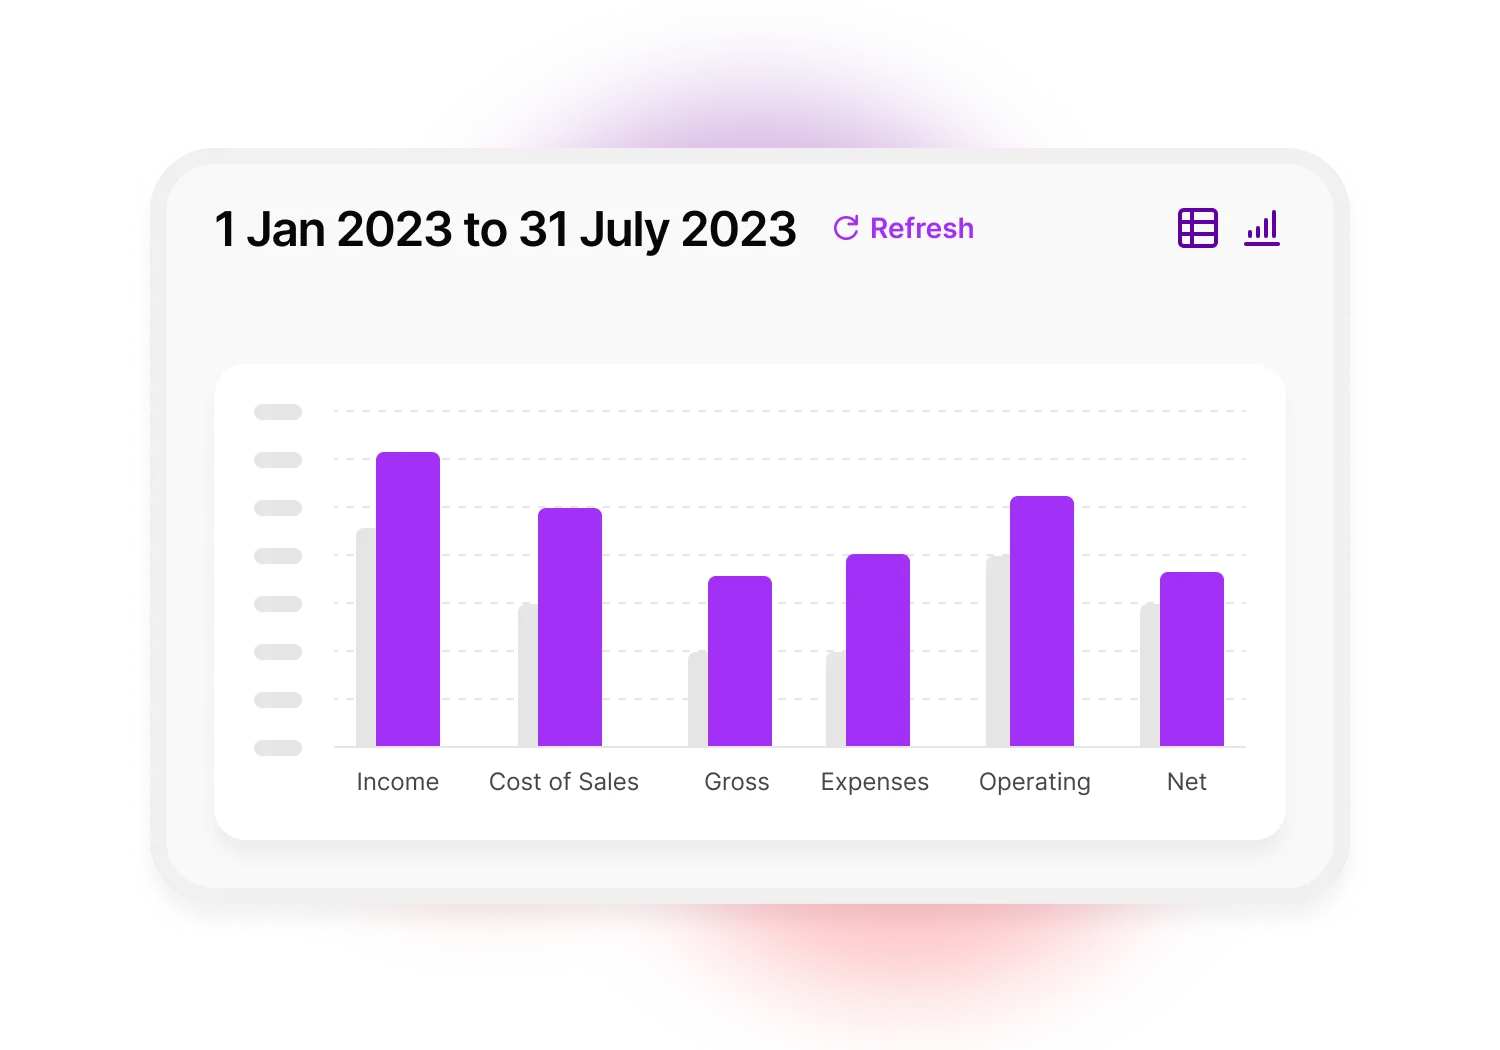 A simple financial report in MYOB Business. On the top is the date range and the option for you to switch between a table and a graph. This image is a bar graph and includes income, cost of sales, gross, expenses, operating costs and net profit.